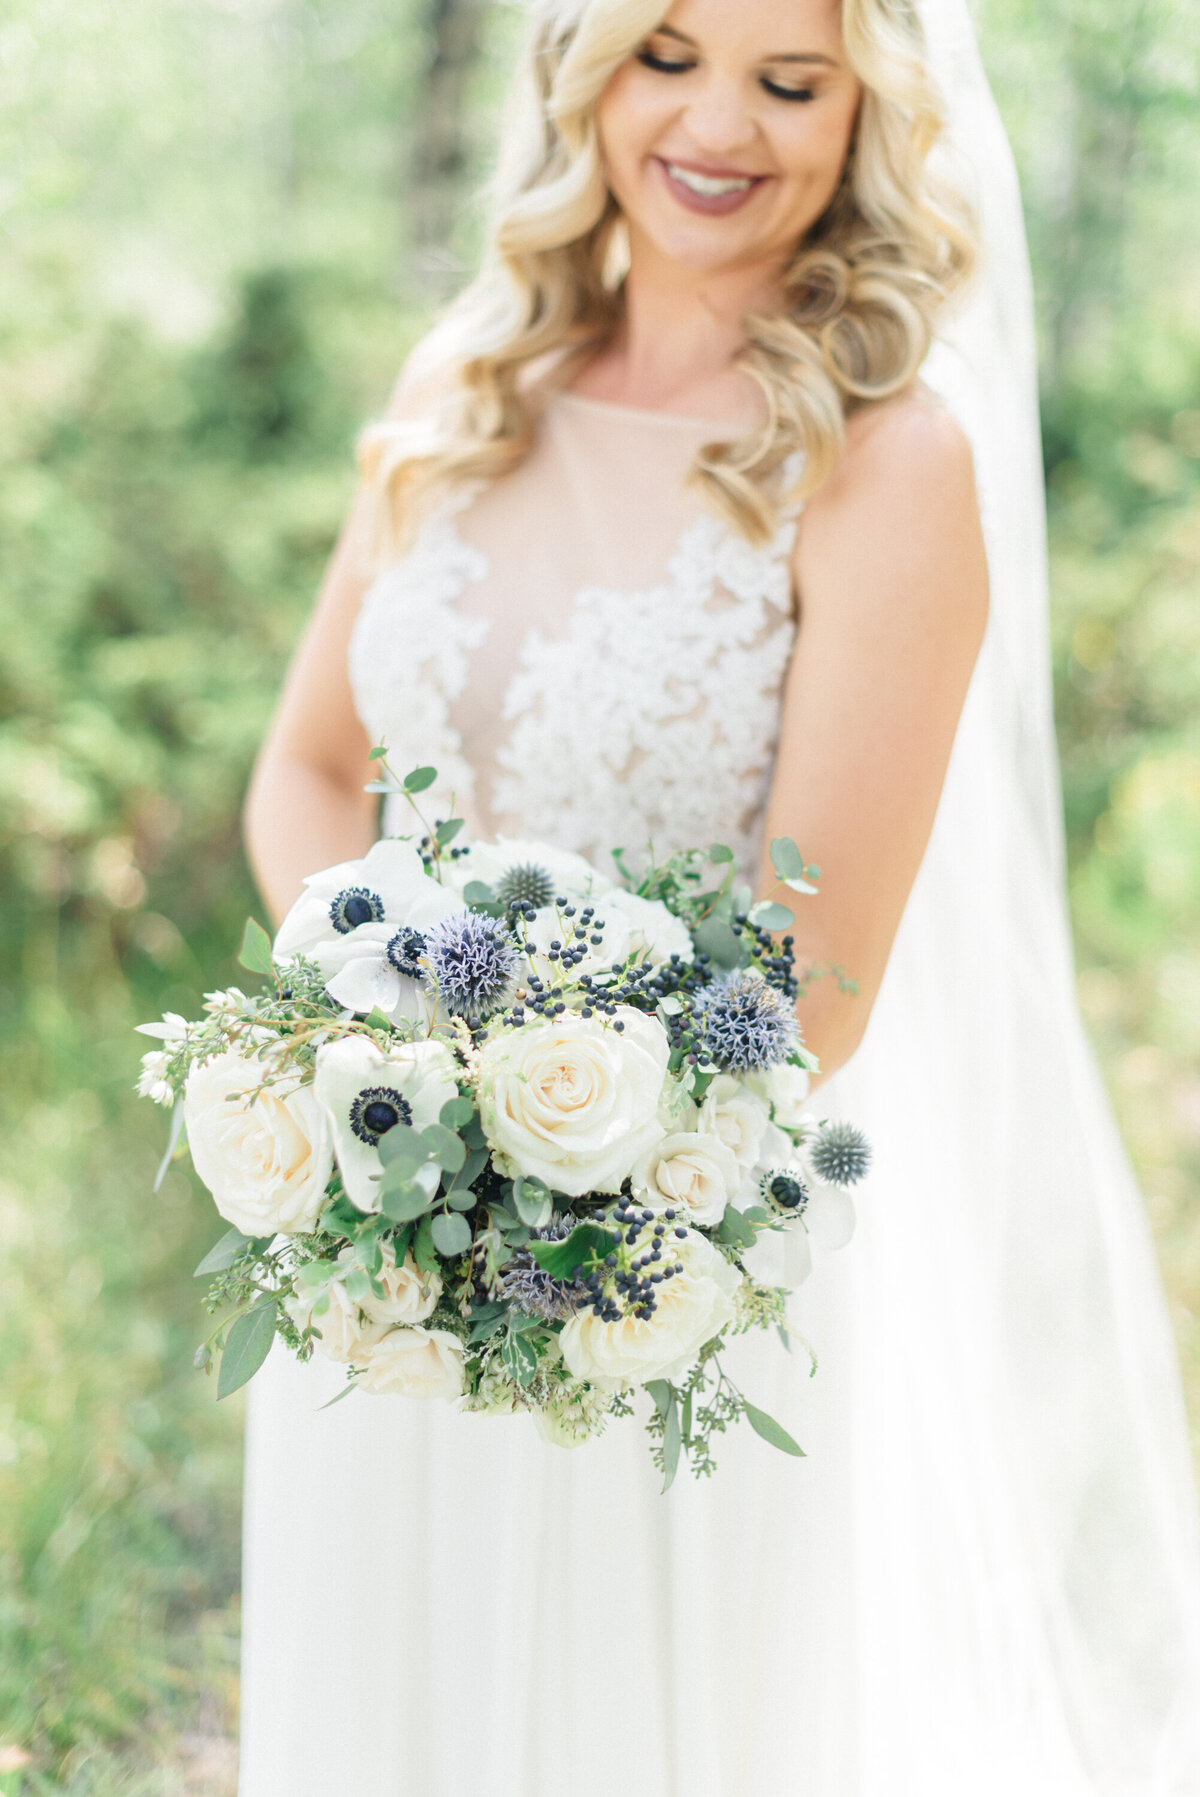 Summer Granby Wedding at the summit. Bridal portraits with aspens and beautiful florals.